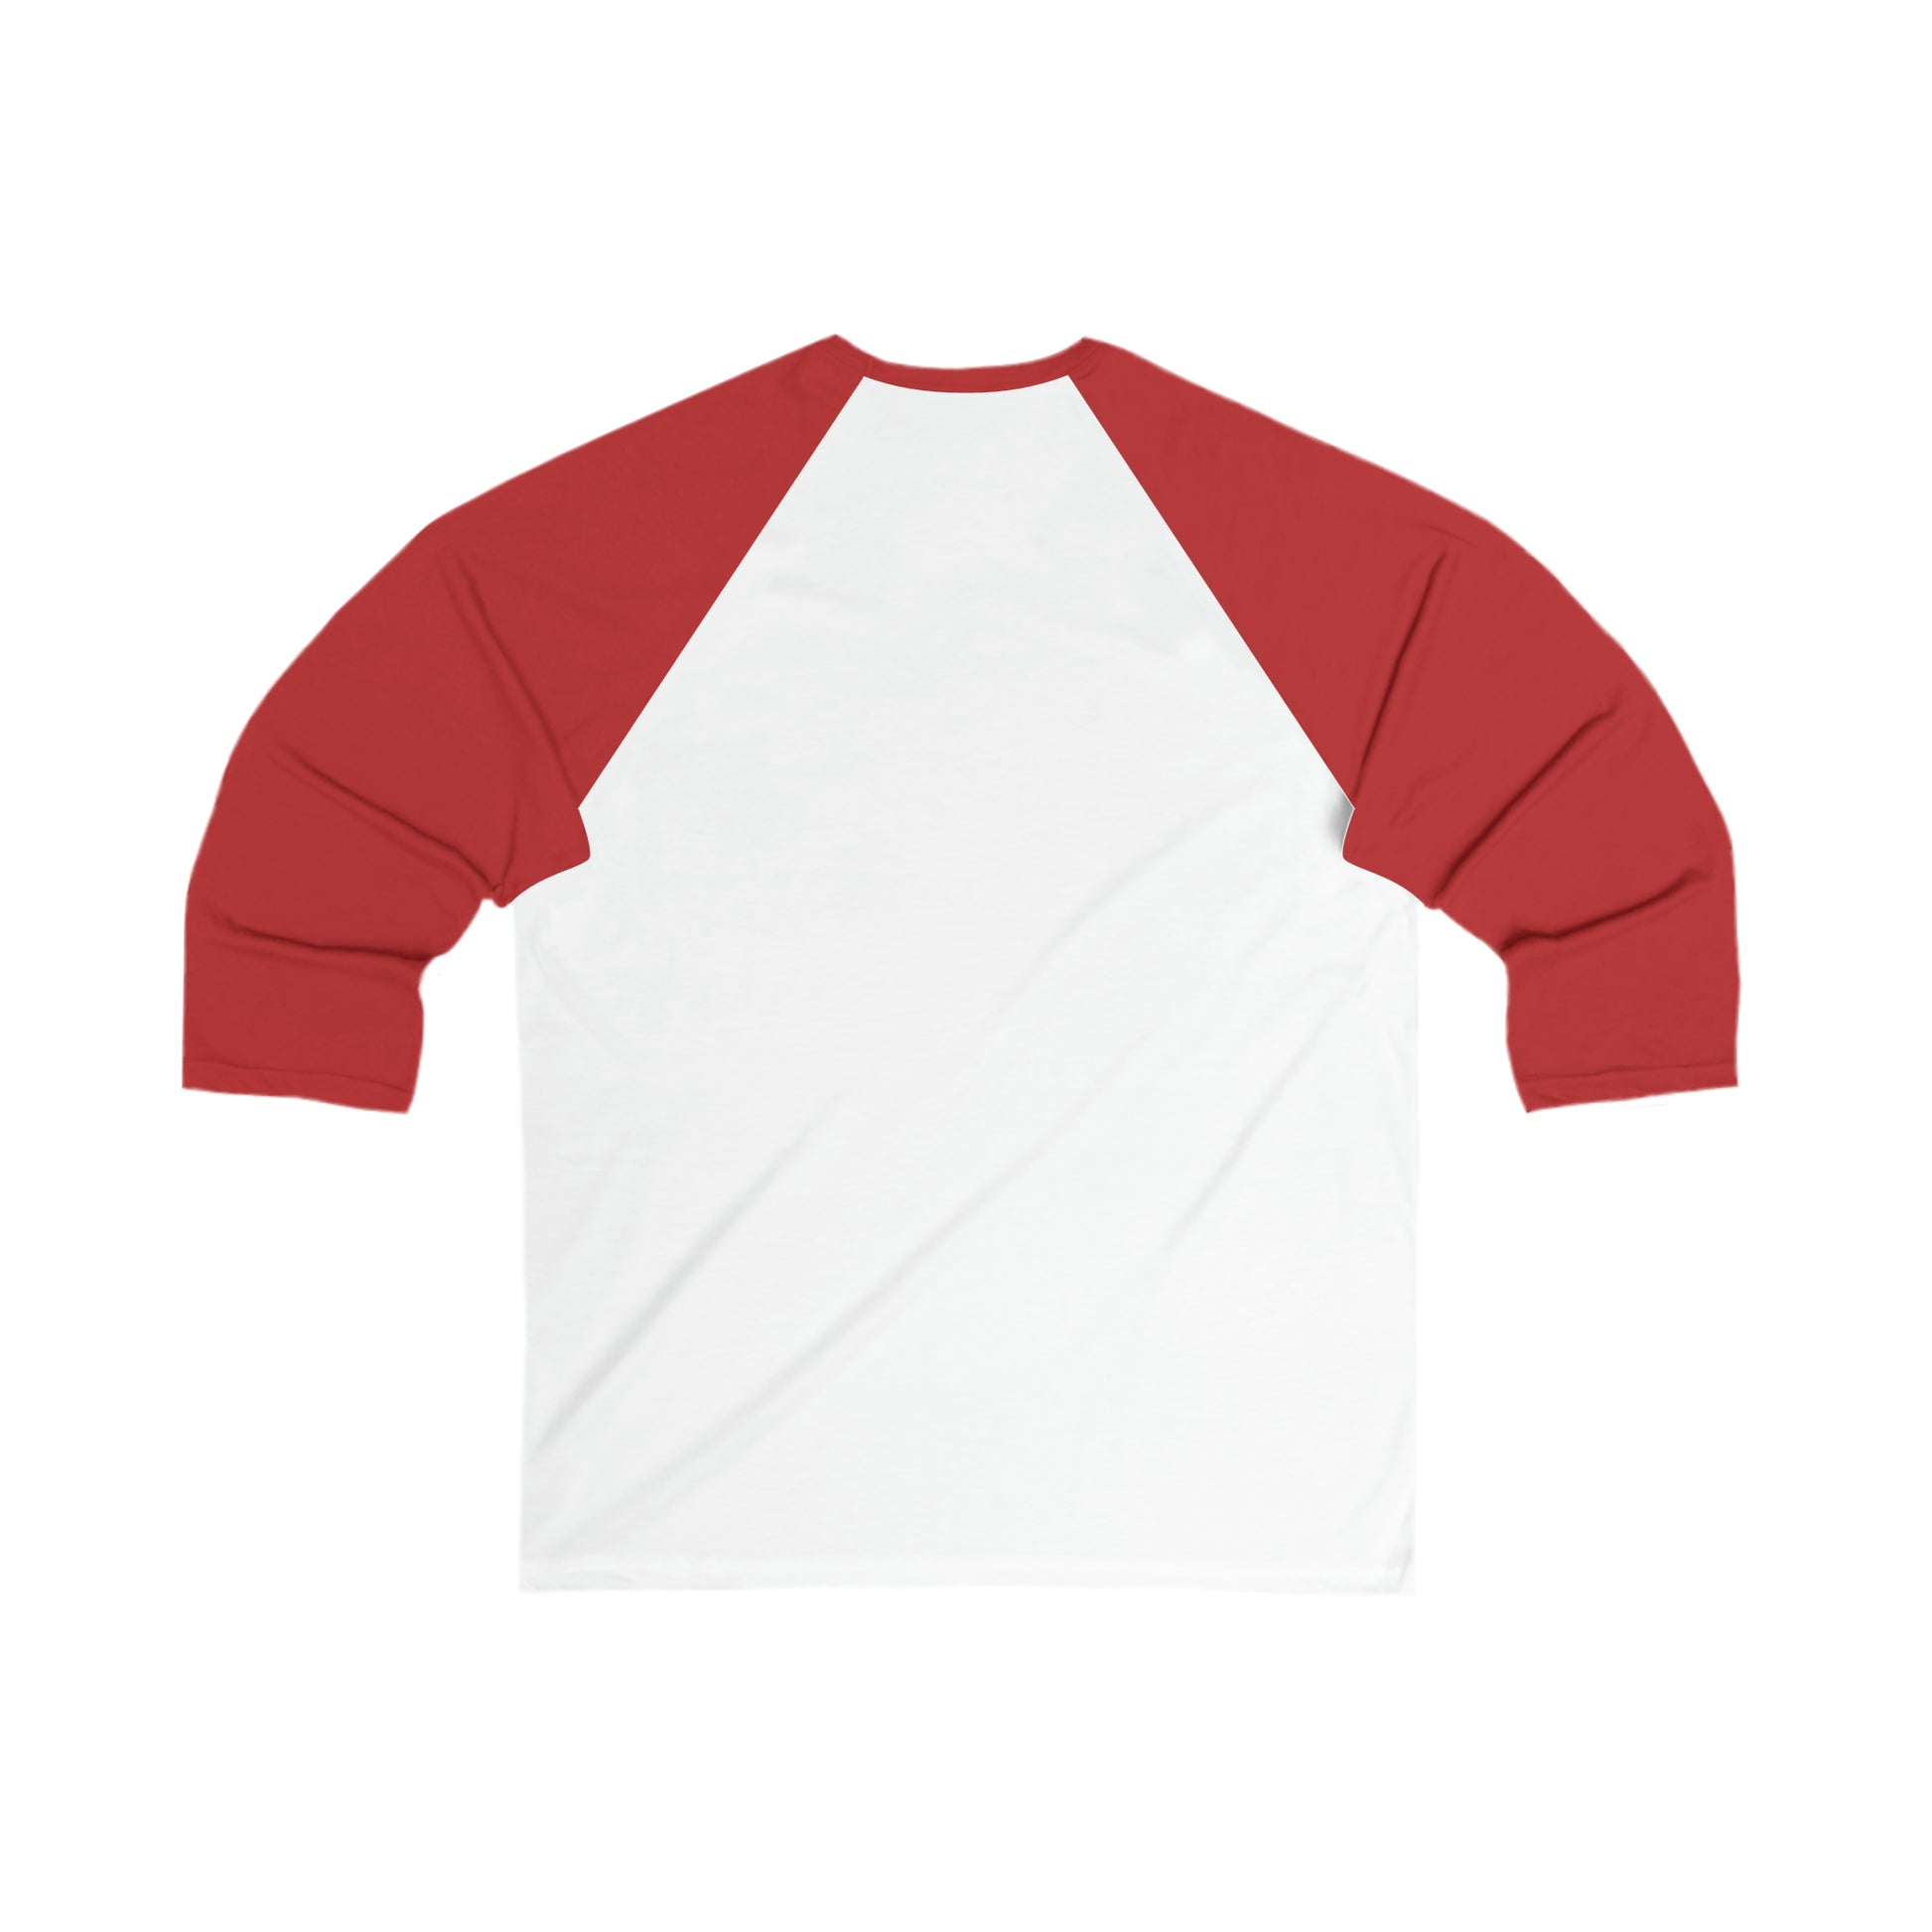 A Printify Unisex 3/4 Sleeve Logo Baseball Tee with a white body and red sleeves, displayed on a plain white background, inspired by the vibrant Cabbagetown neighborhood in Toronto.